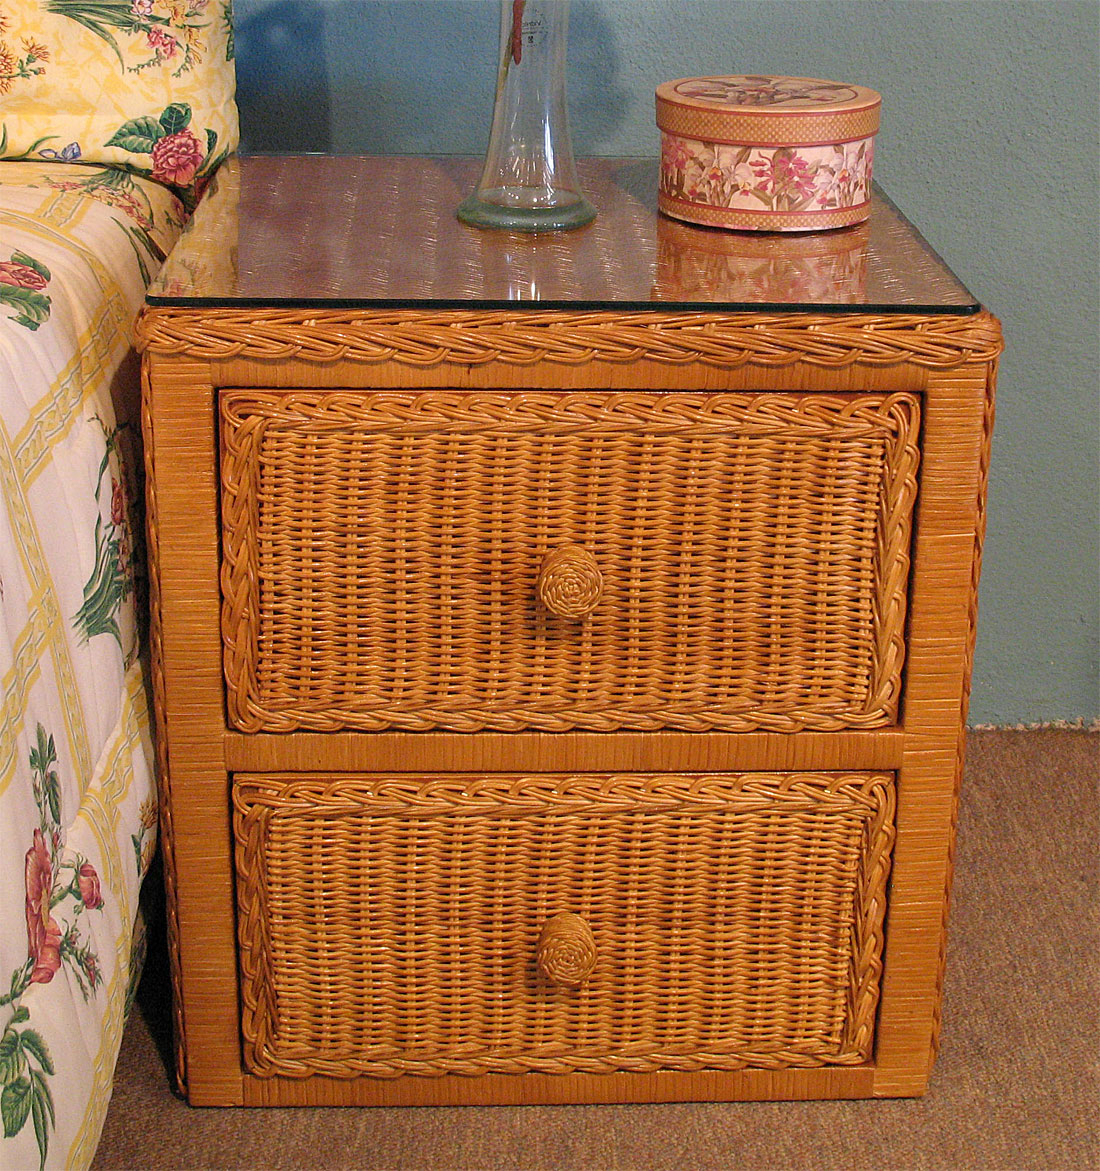 Wicker Night Table 2 Drawers Traditional Style with Glass Top, Caramel